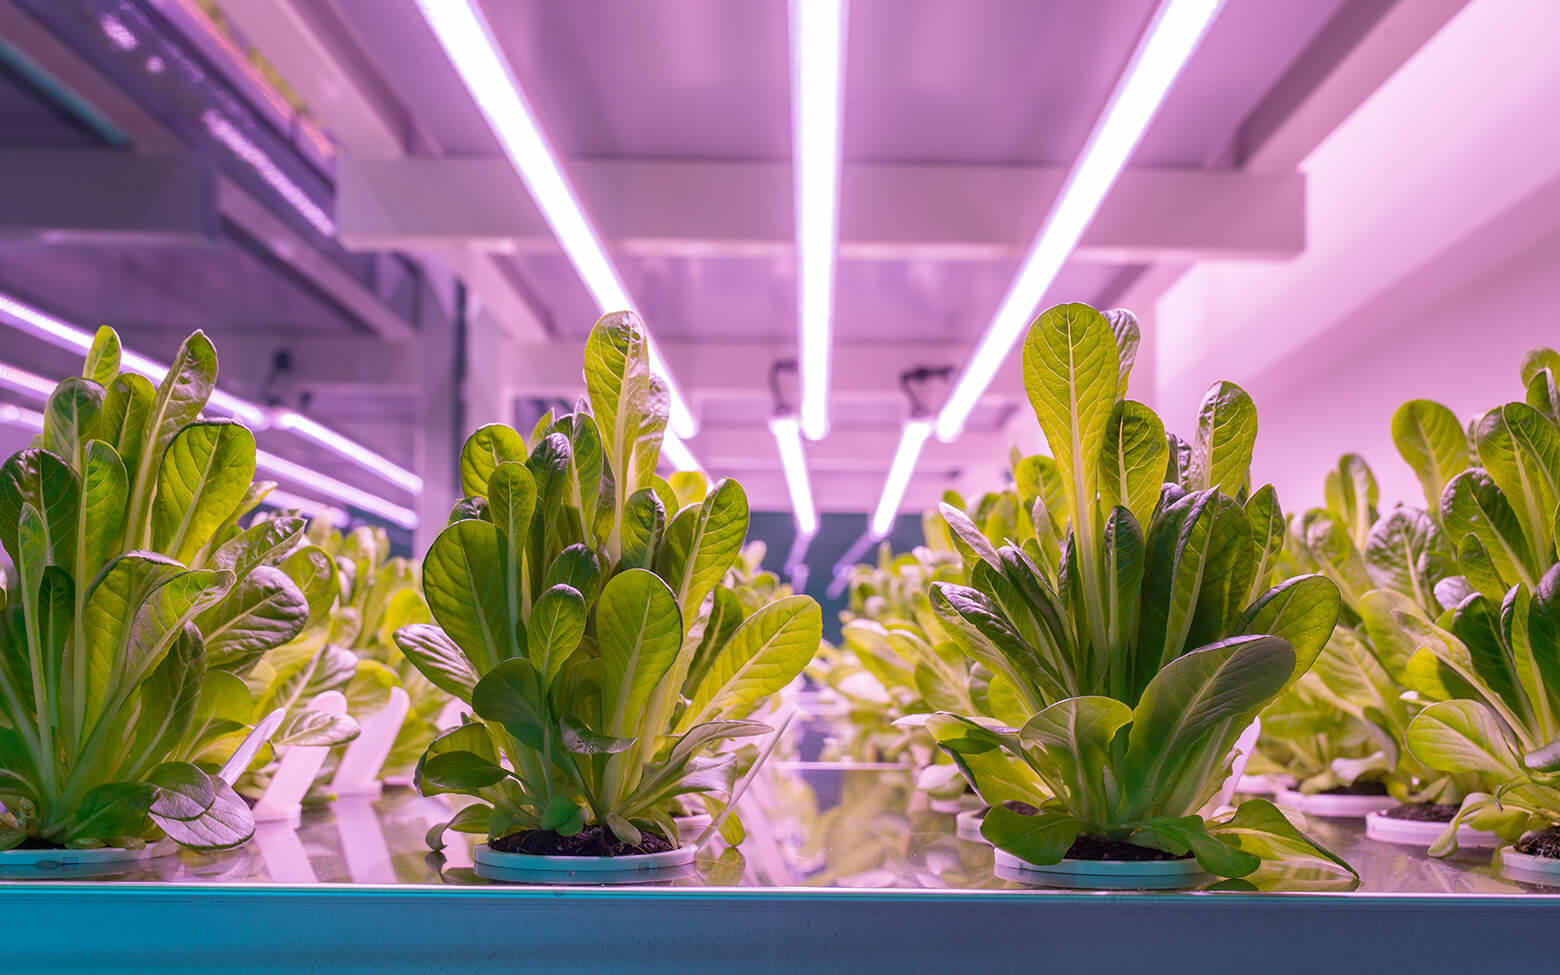 Click & Grow - The leading innovators of indoor gardening and food sustainability